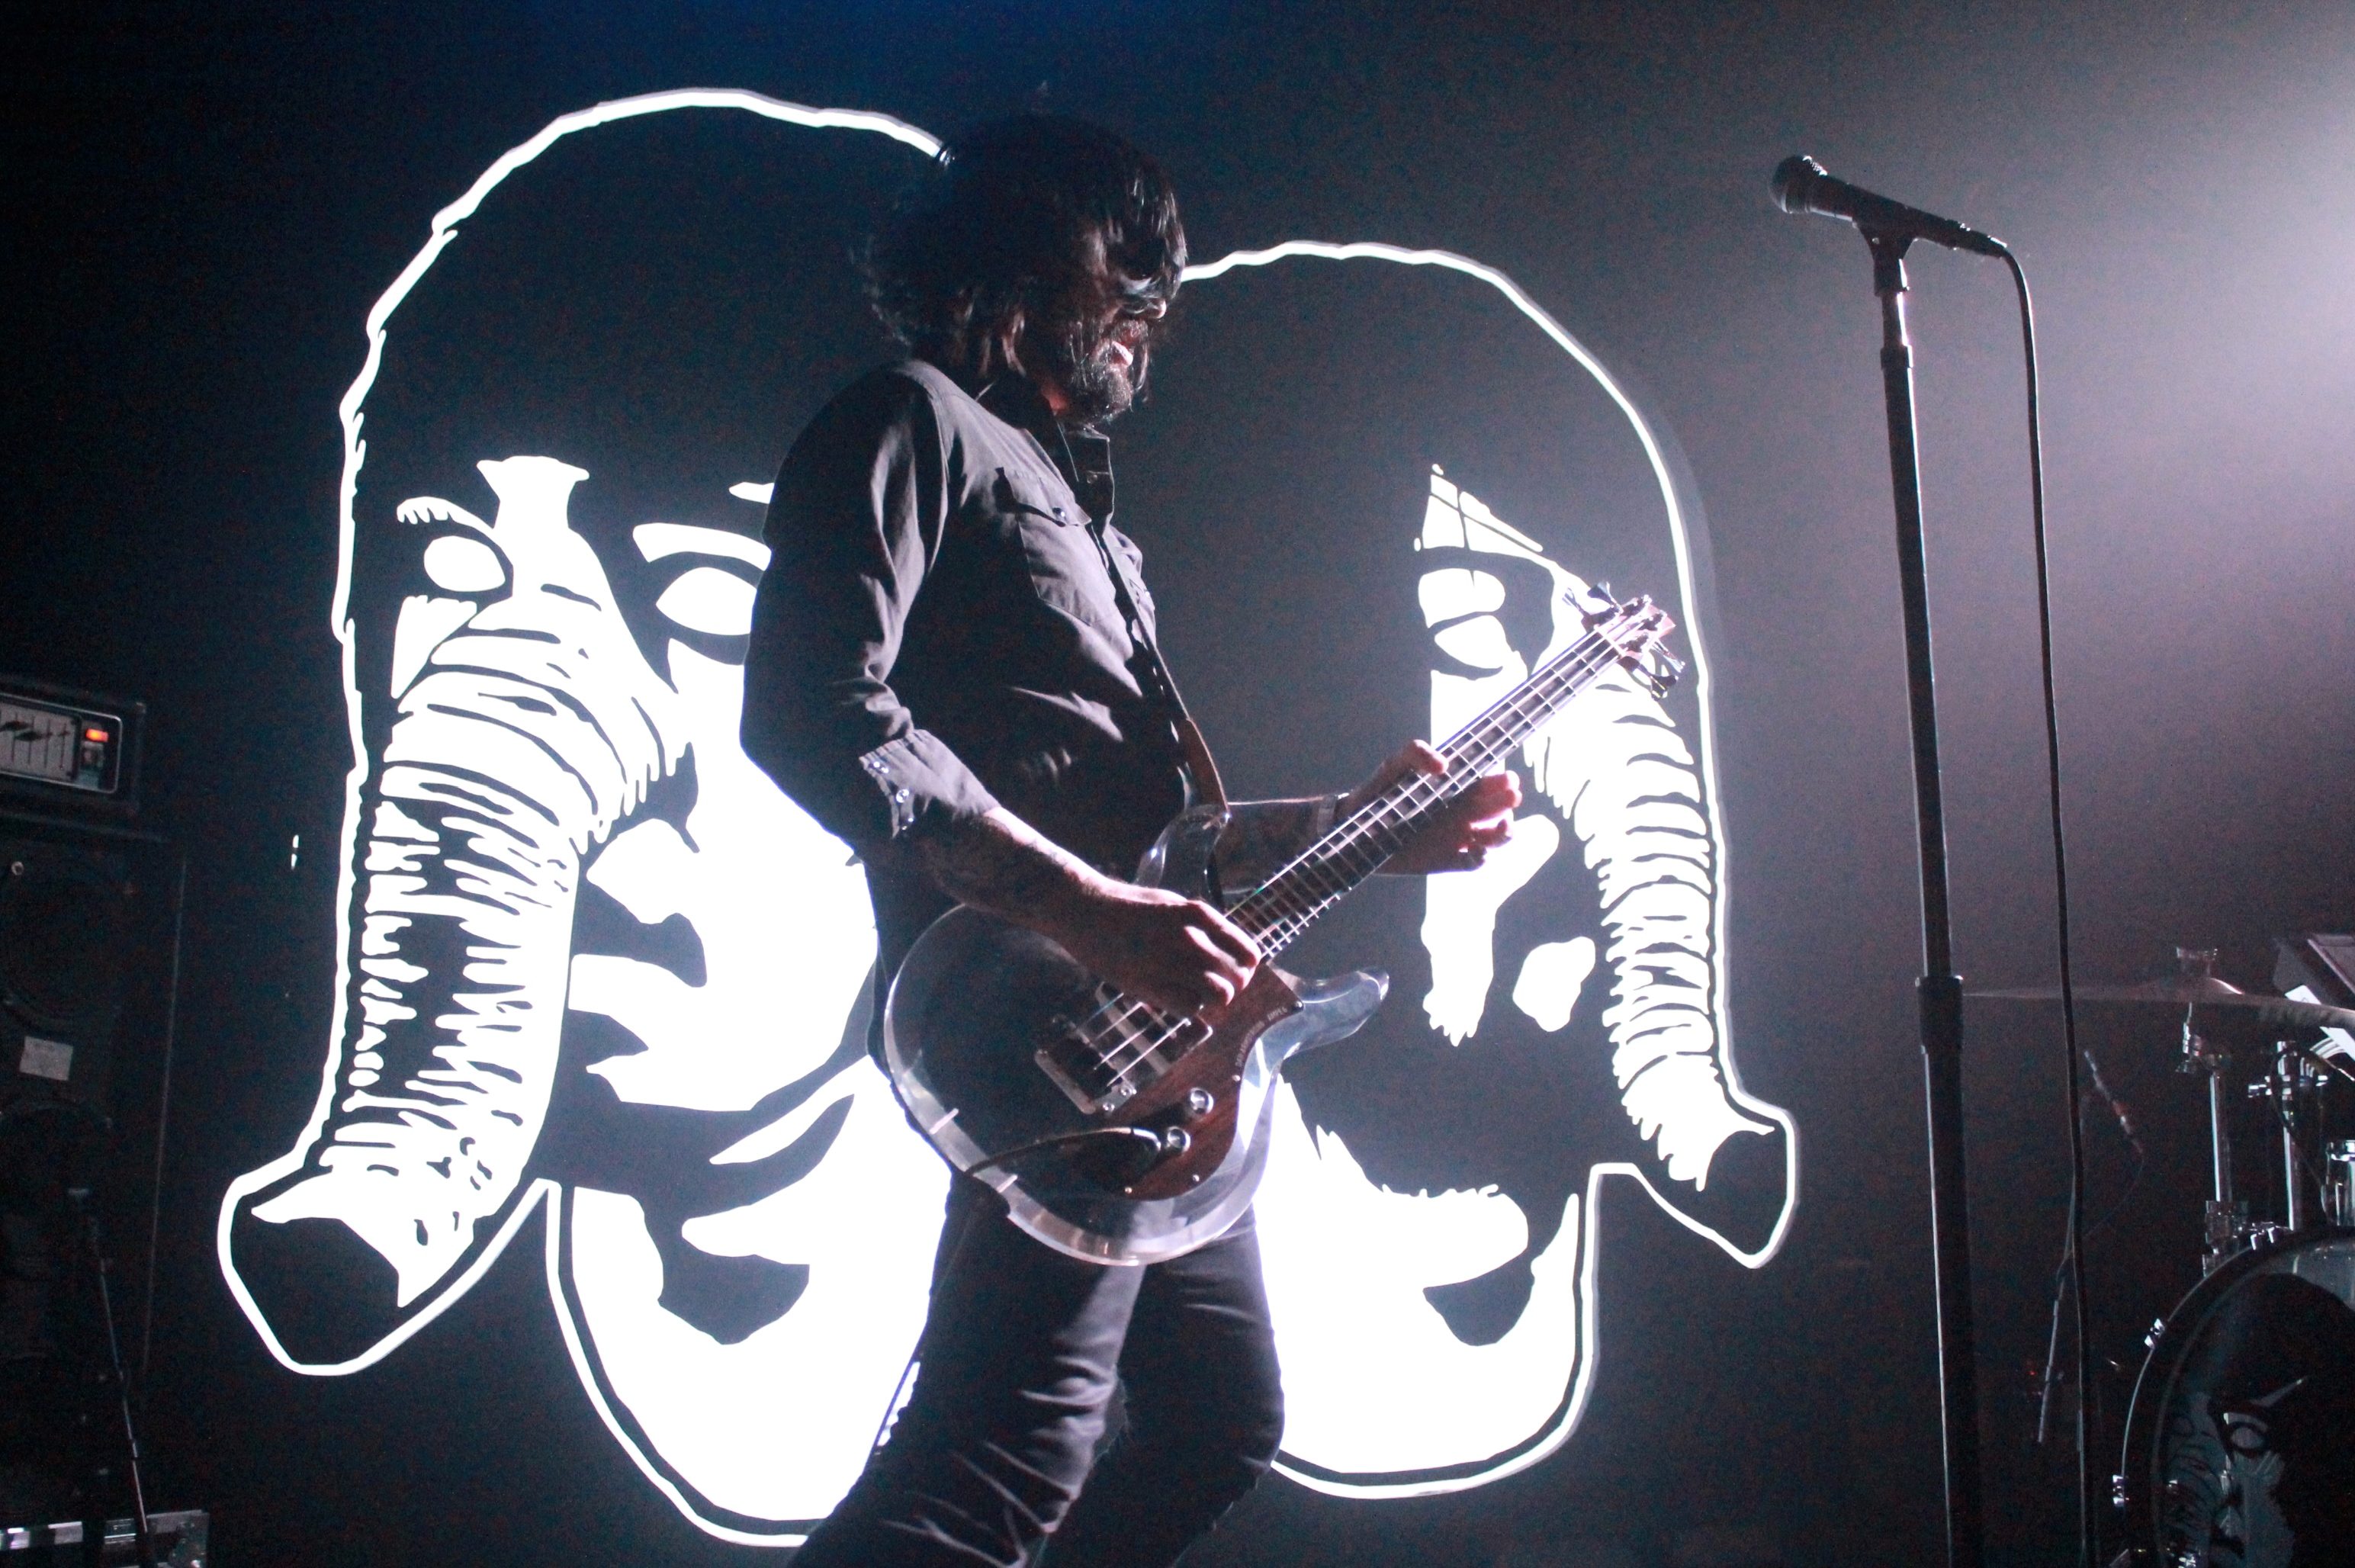 Death From Above 1979 Members Reveal They Turned Down Opening Slot on Daft Punk's Final, Legendary Alive 2007 Tour